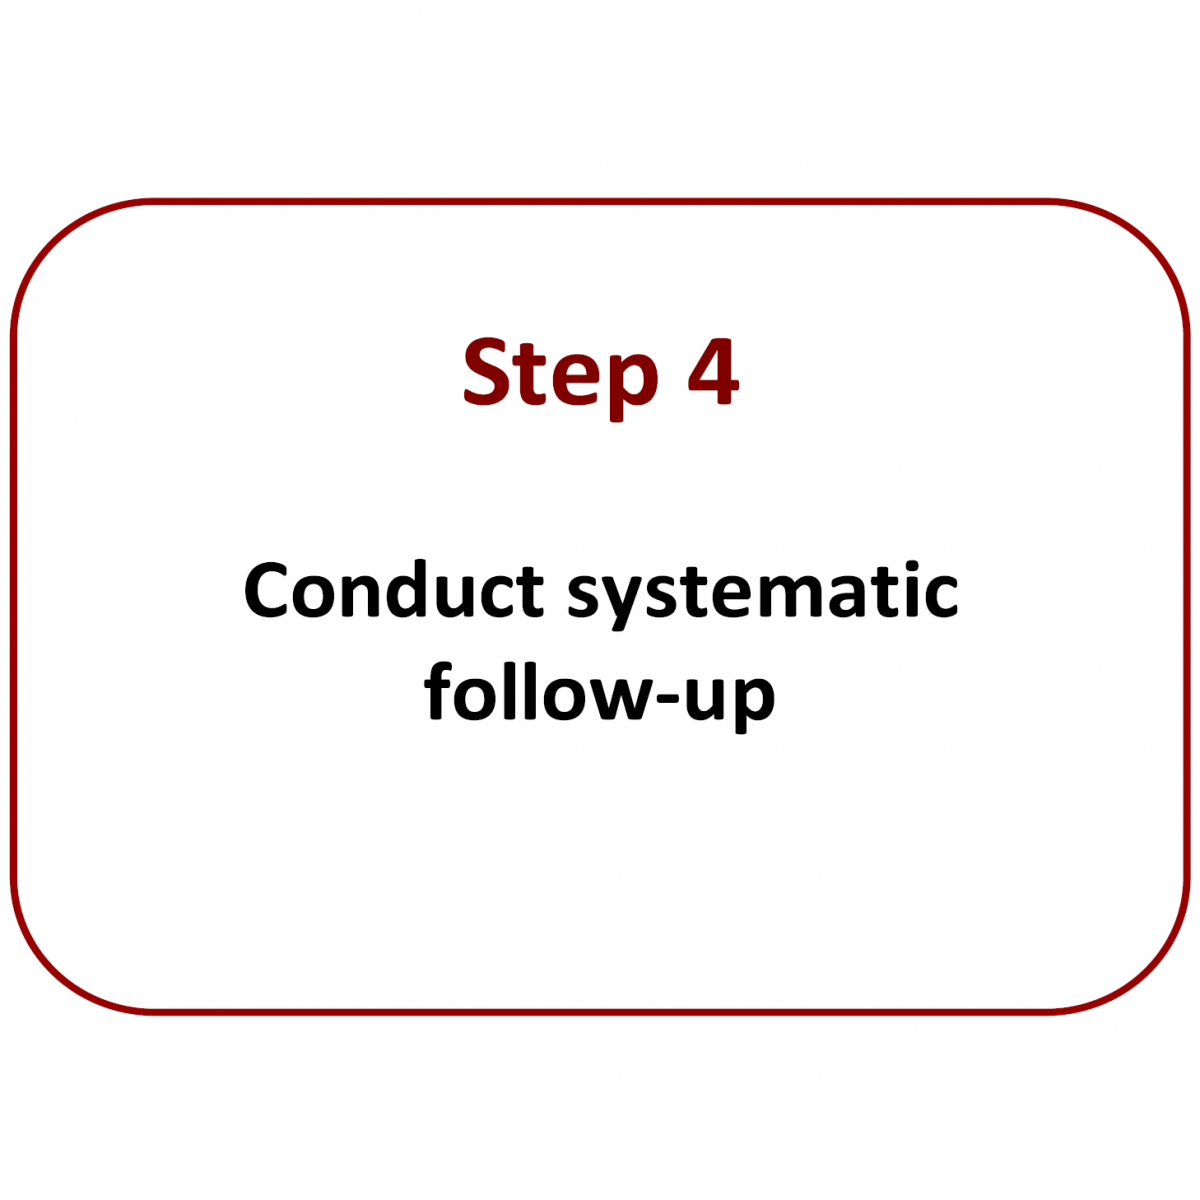 Step 4: Conduct systematic follow-up